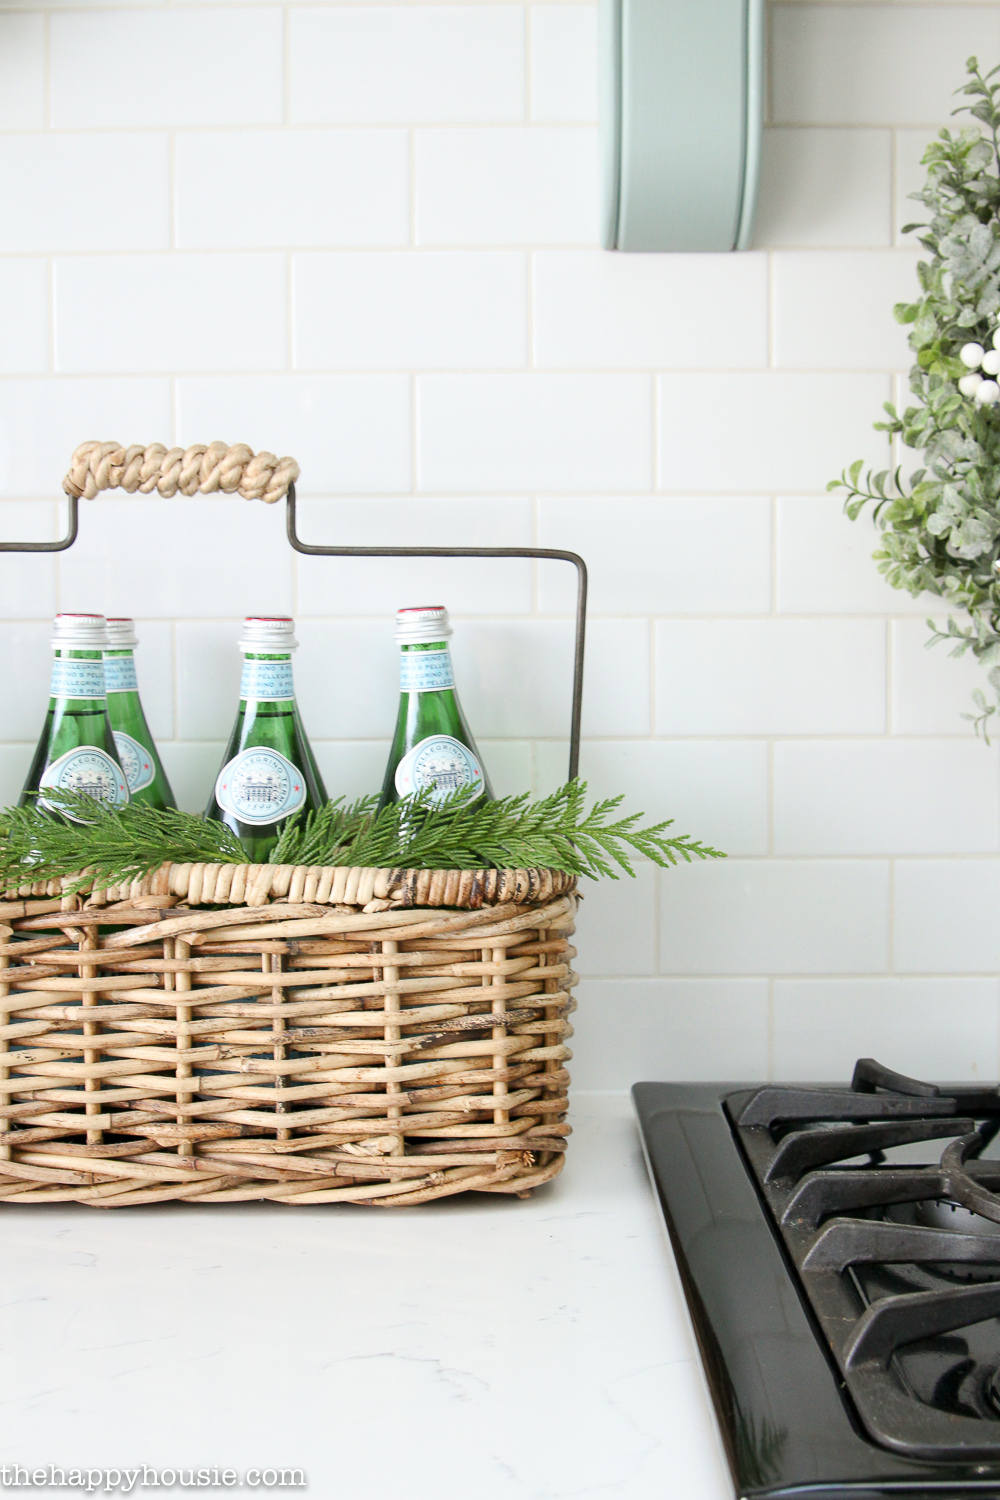 A wicker basket with a handle holds Perrier water.